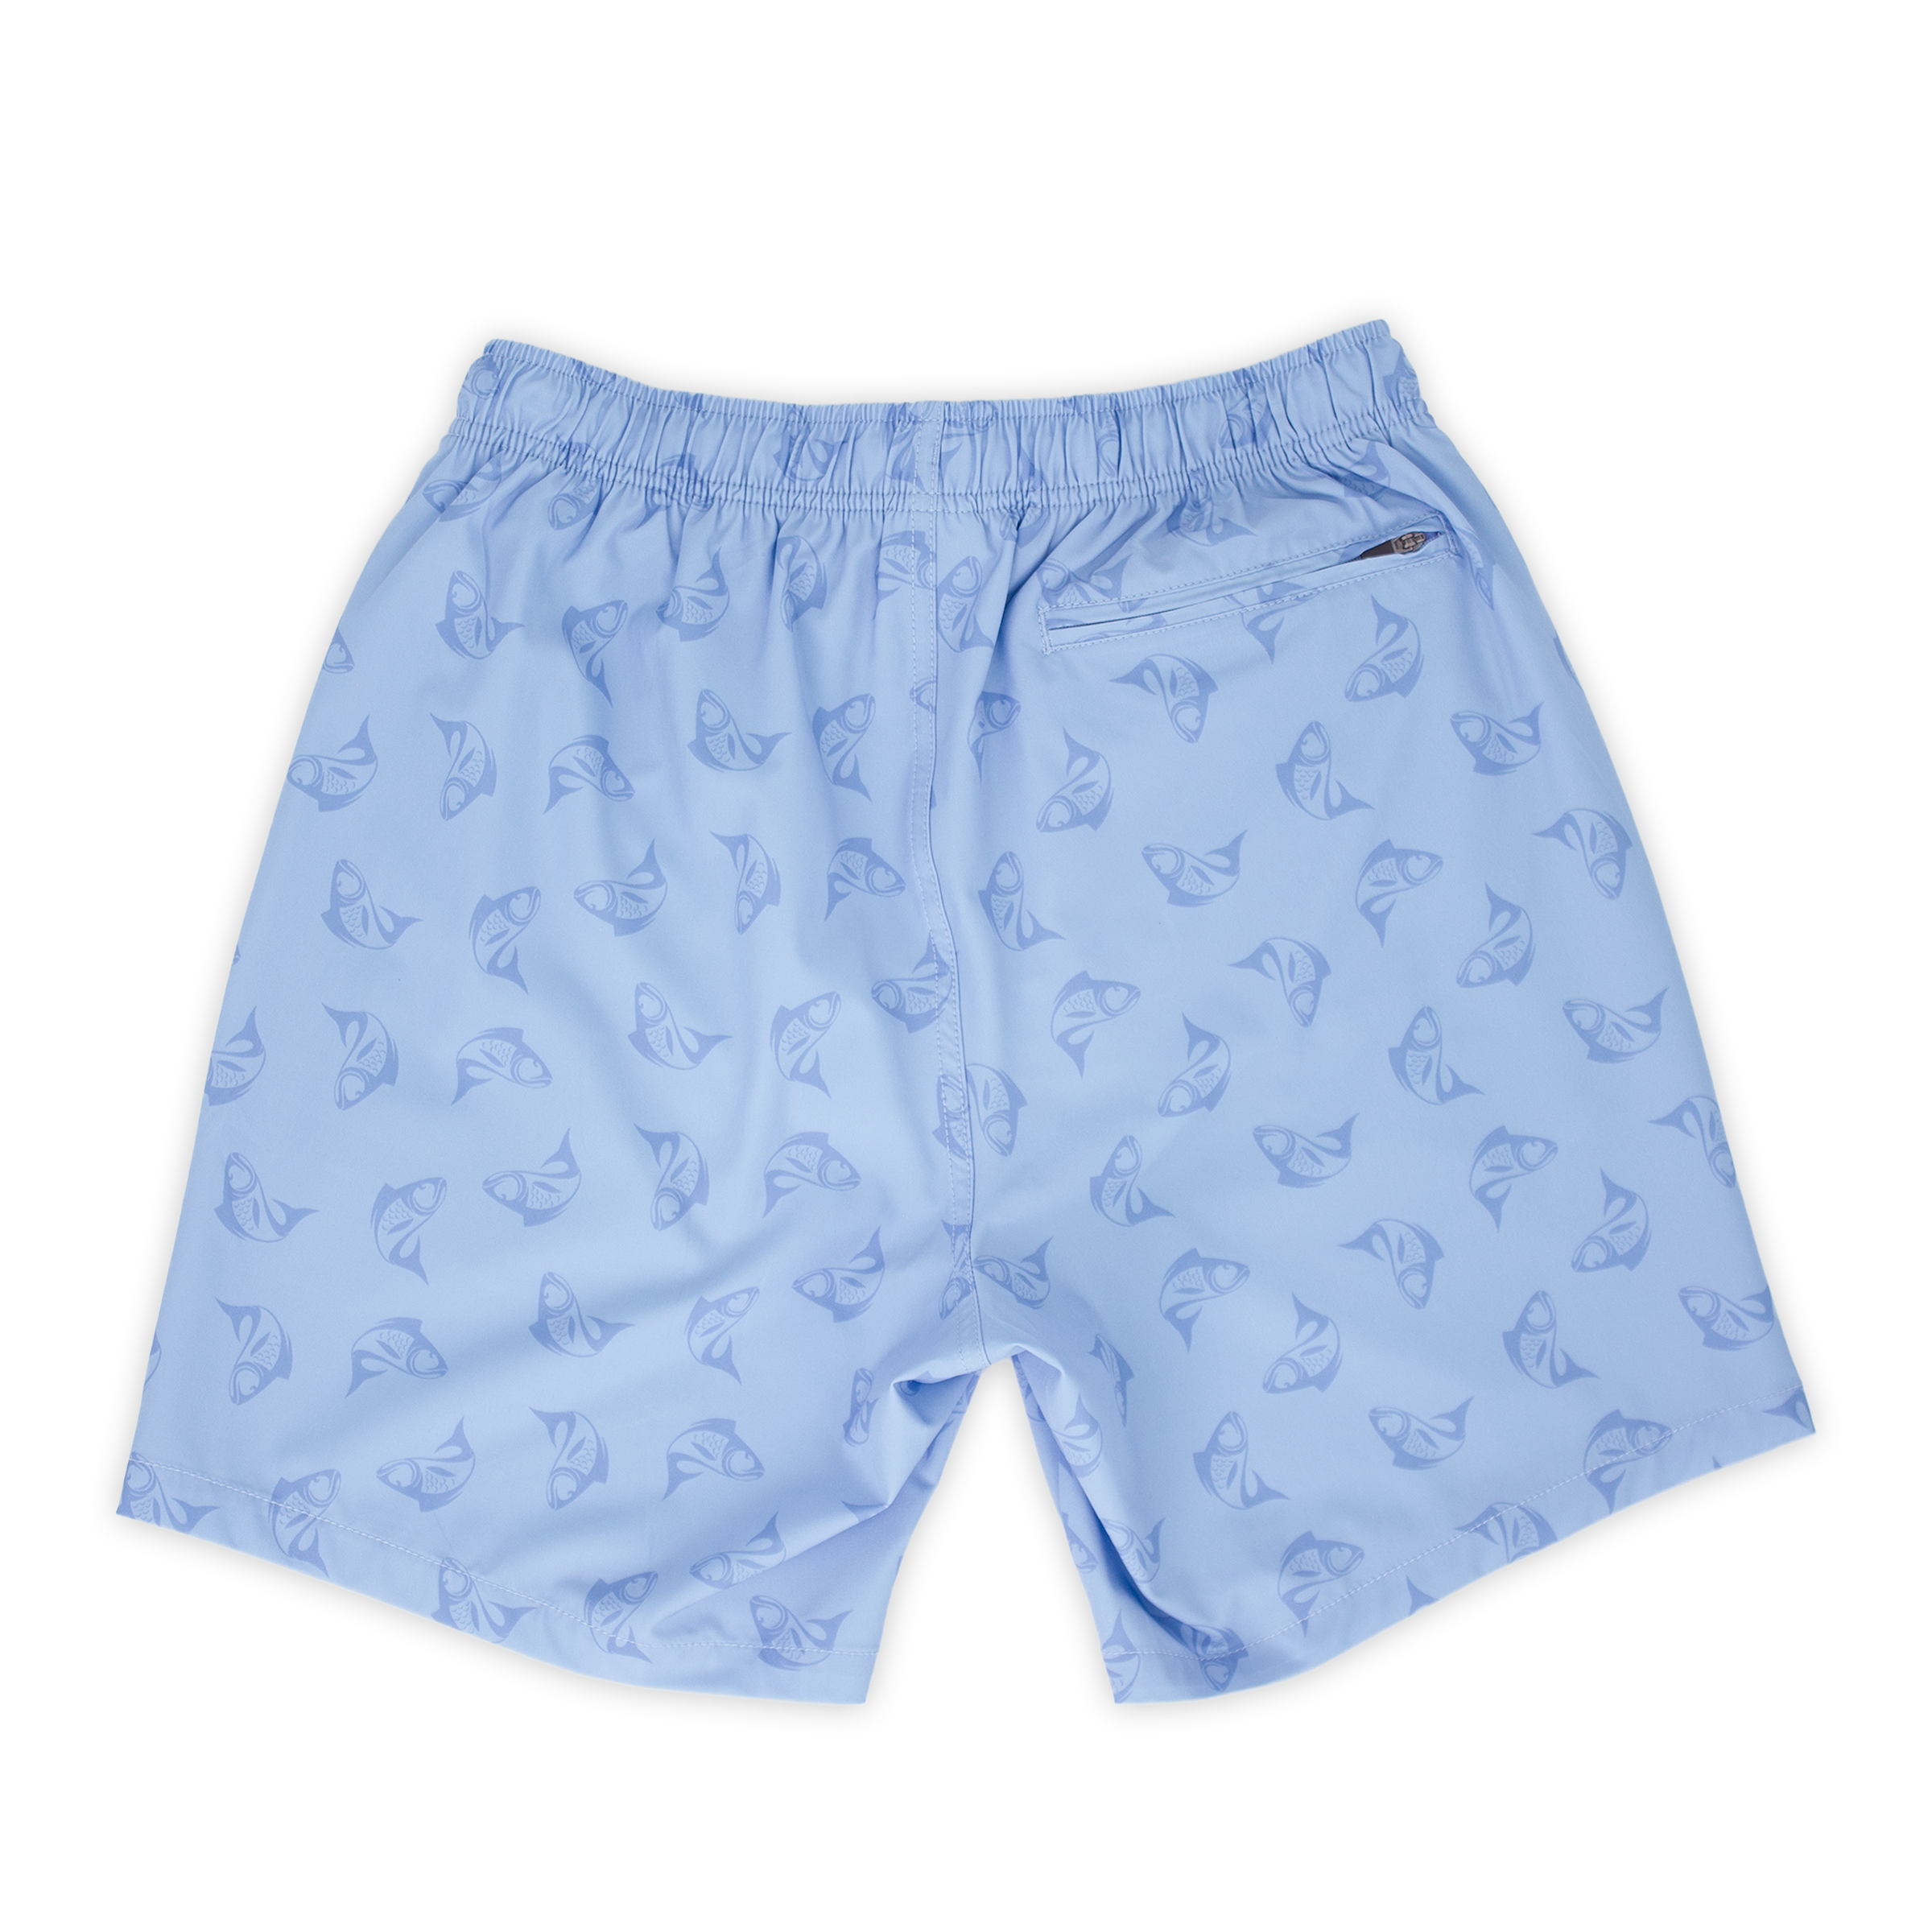 Stretch Swim 7" Bonita back, a light periwinkle blue with a print of darker blue sketched fish with an elastic waistband and a back right zippered pocket